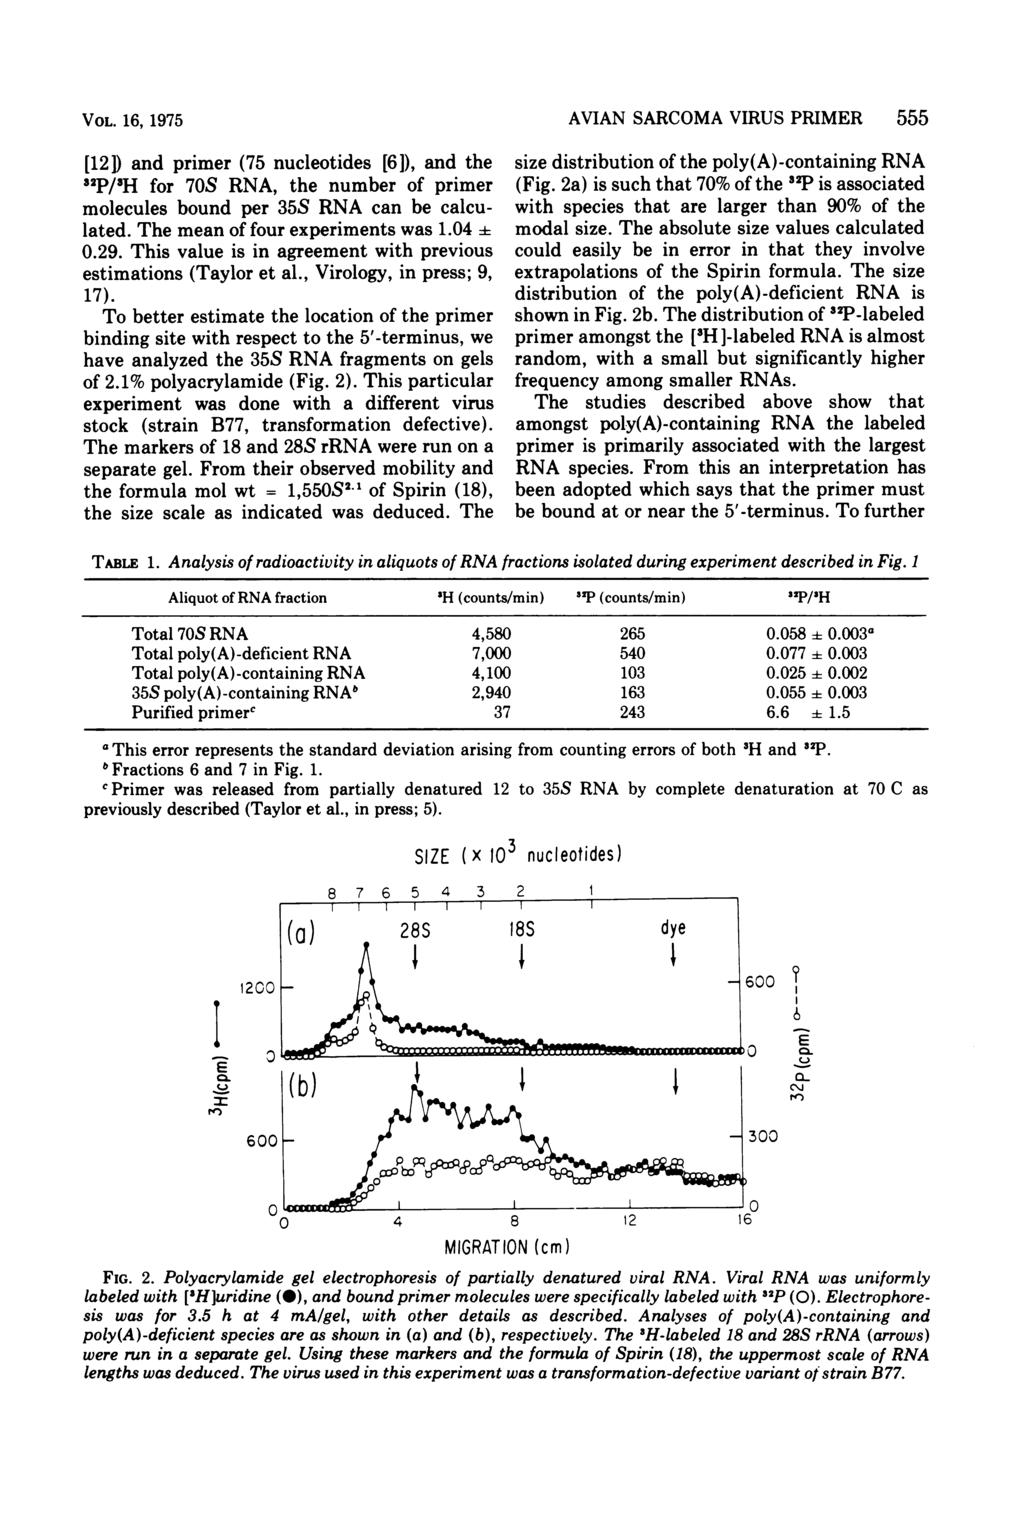 VOL. 16, 1975 [12D and primer (75 nucleotides [6]), and the 32P/3H for 70S RNA, the number of primer molecules bound per 35S RNA can be calculated. The mean of four experiments was 1.04 0.29.